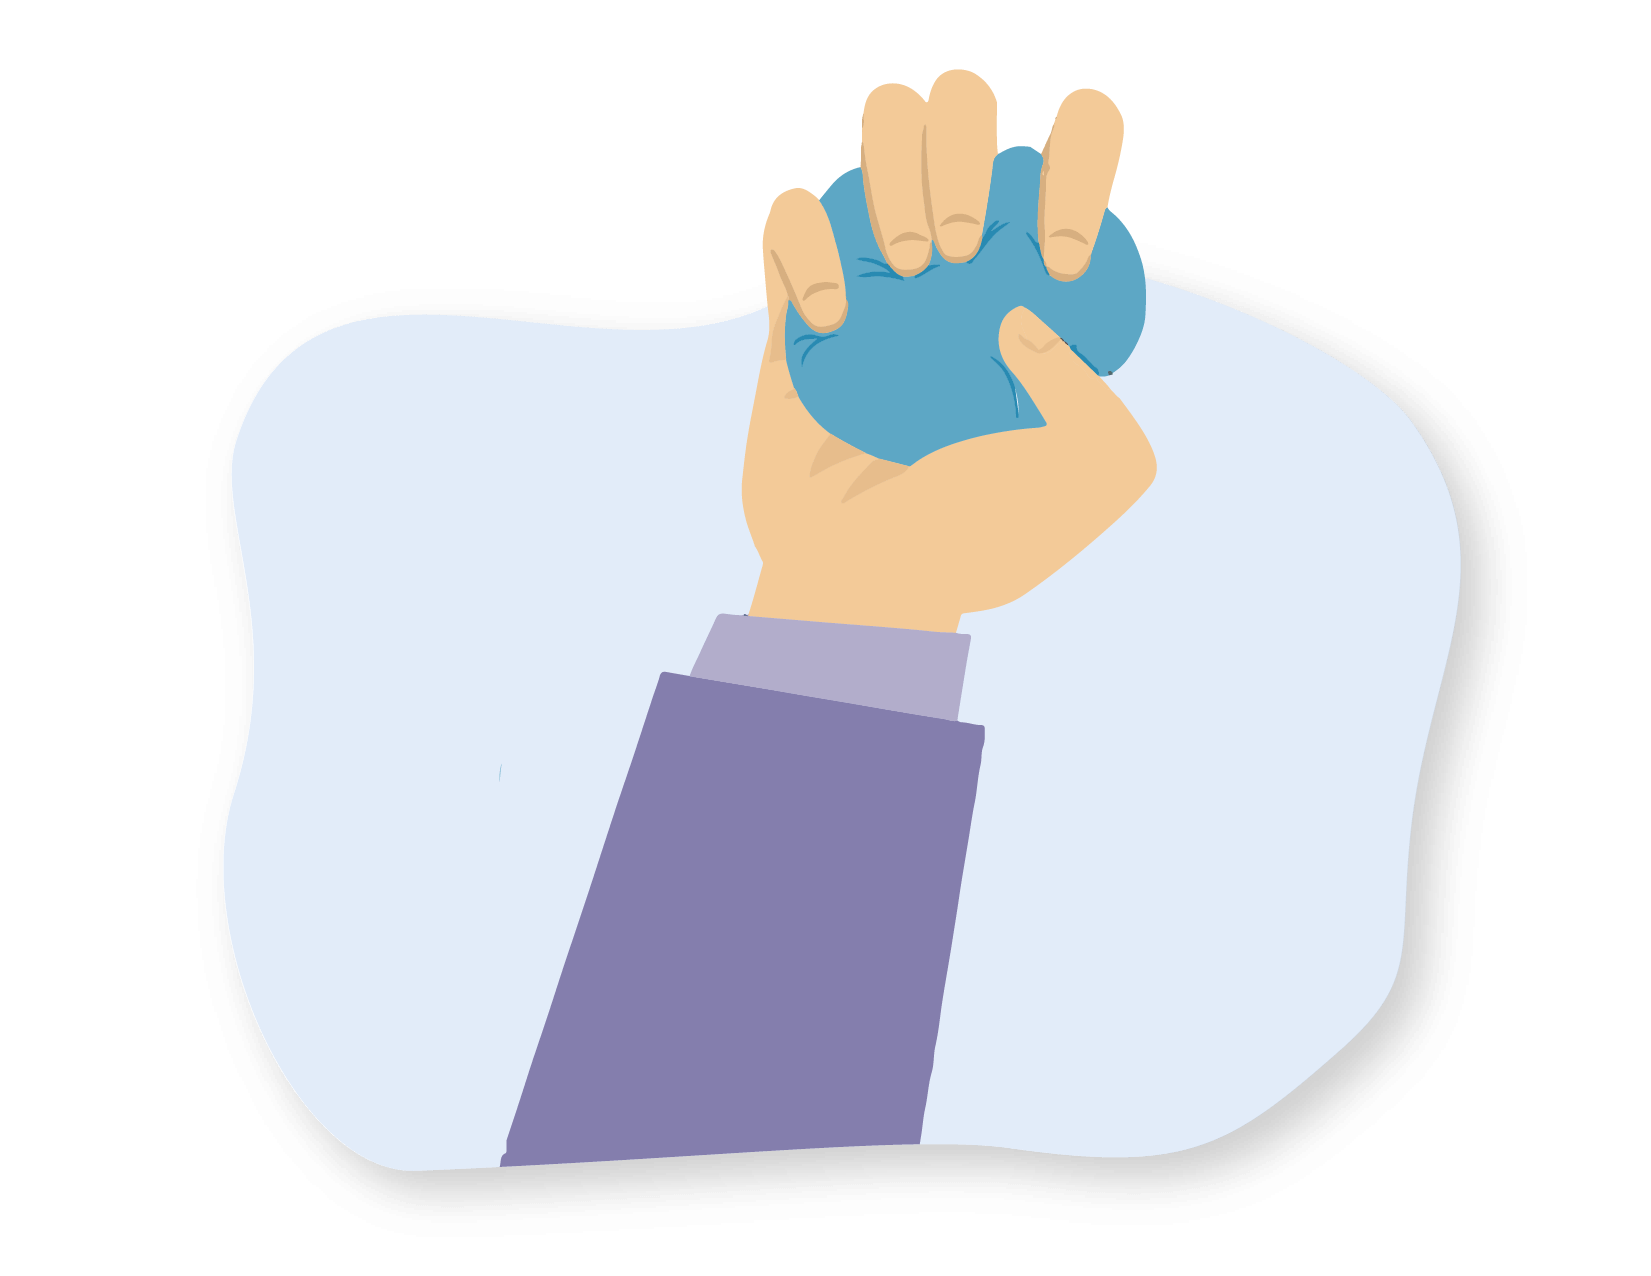 Illustration of a young person’s hand squeezing a stress ball